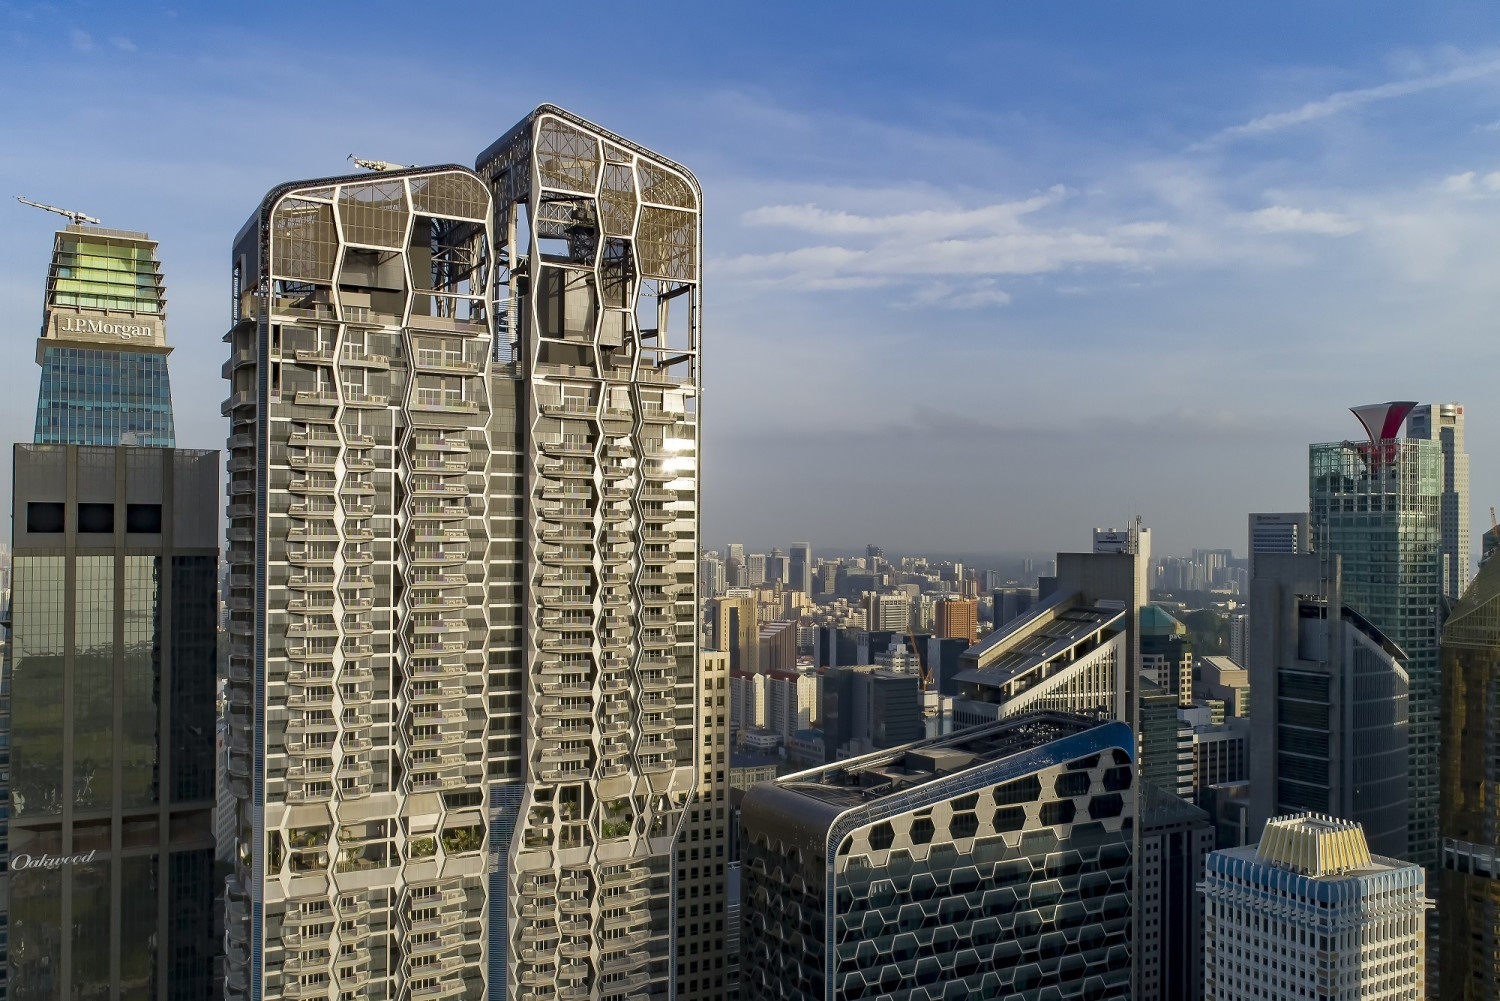 Singapore has joined other places around the world in increasing duties and imposing other restrictions on foreign buyers to try and cool the market. Photo: Knight Frank